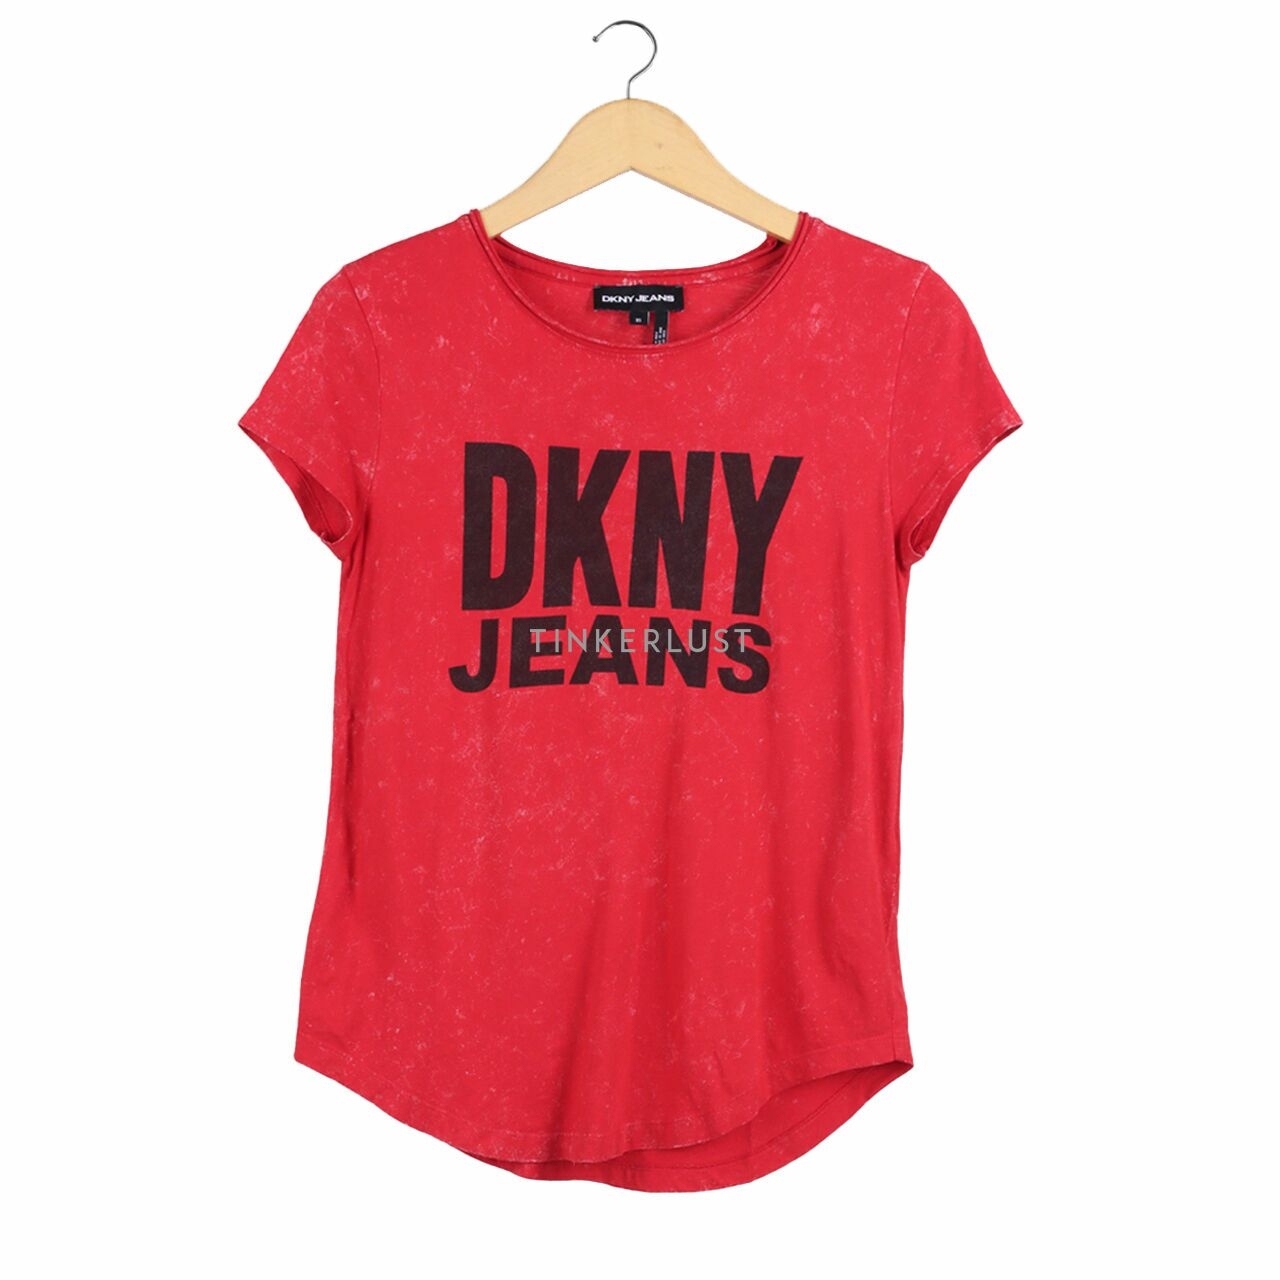 DKNY Jeans Red T-Shirt